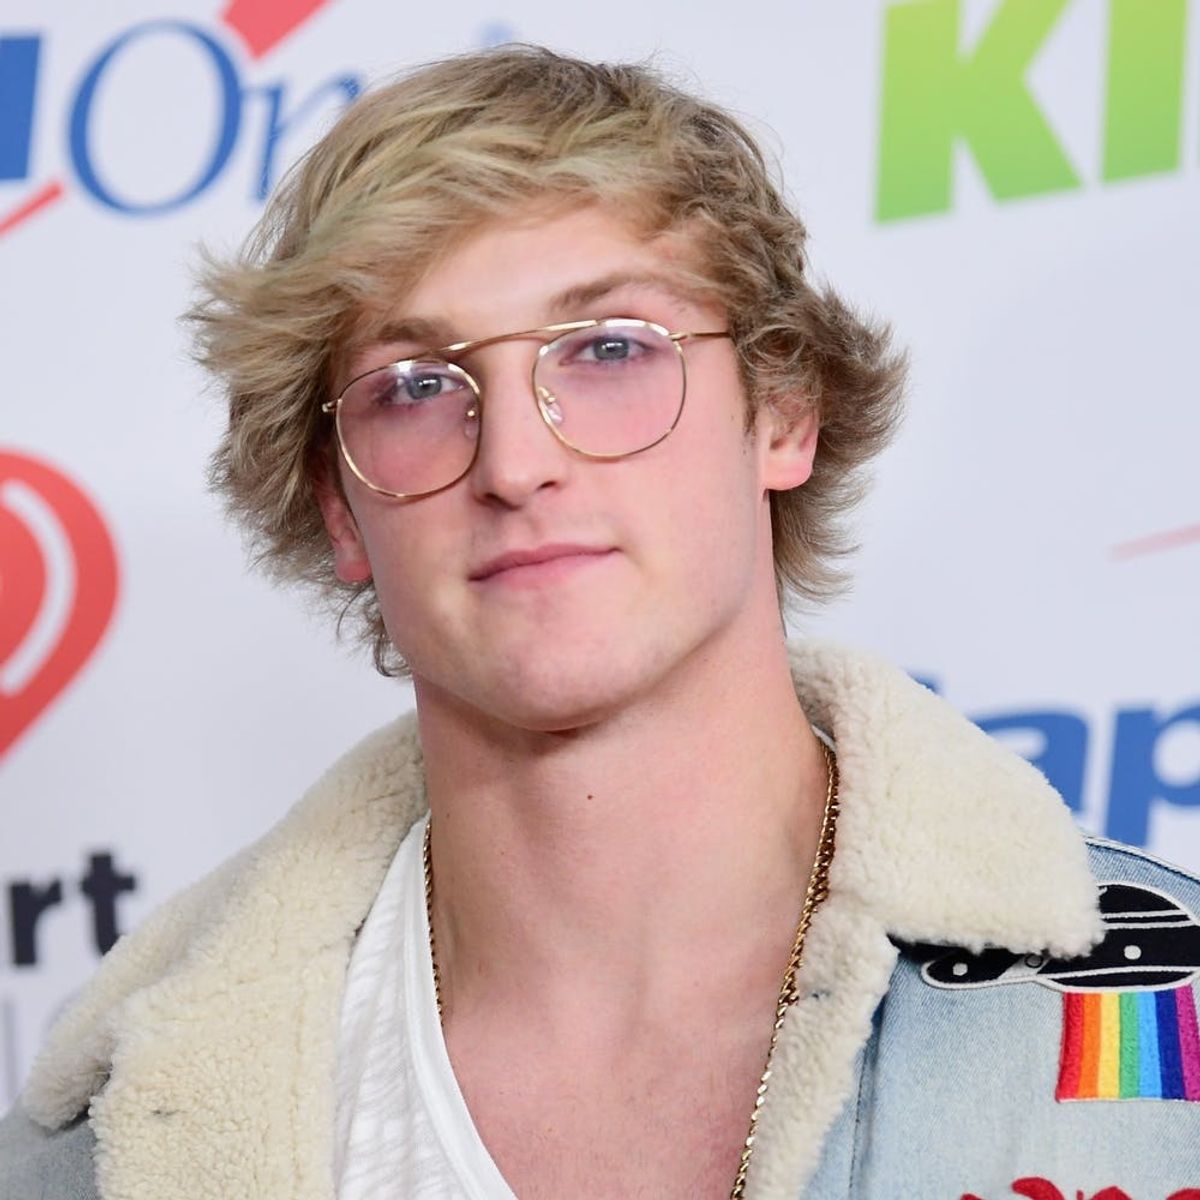 YouTube Has Put Logan Paul Projects on Hold After Disturbing Video